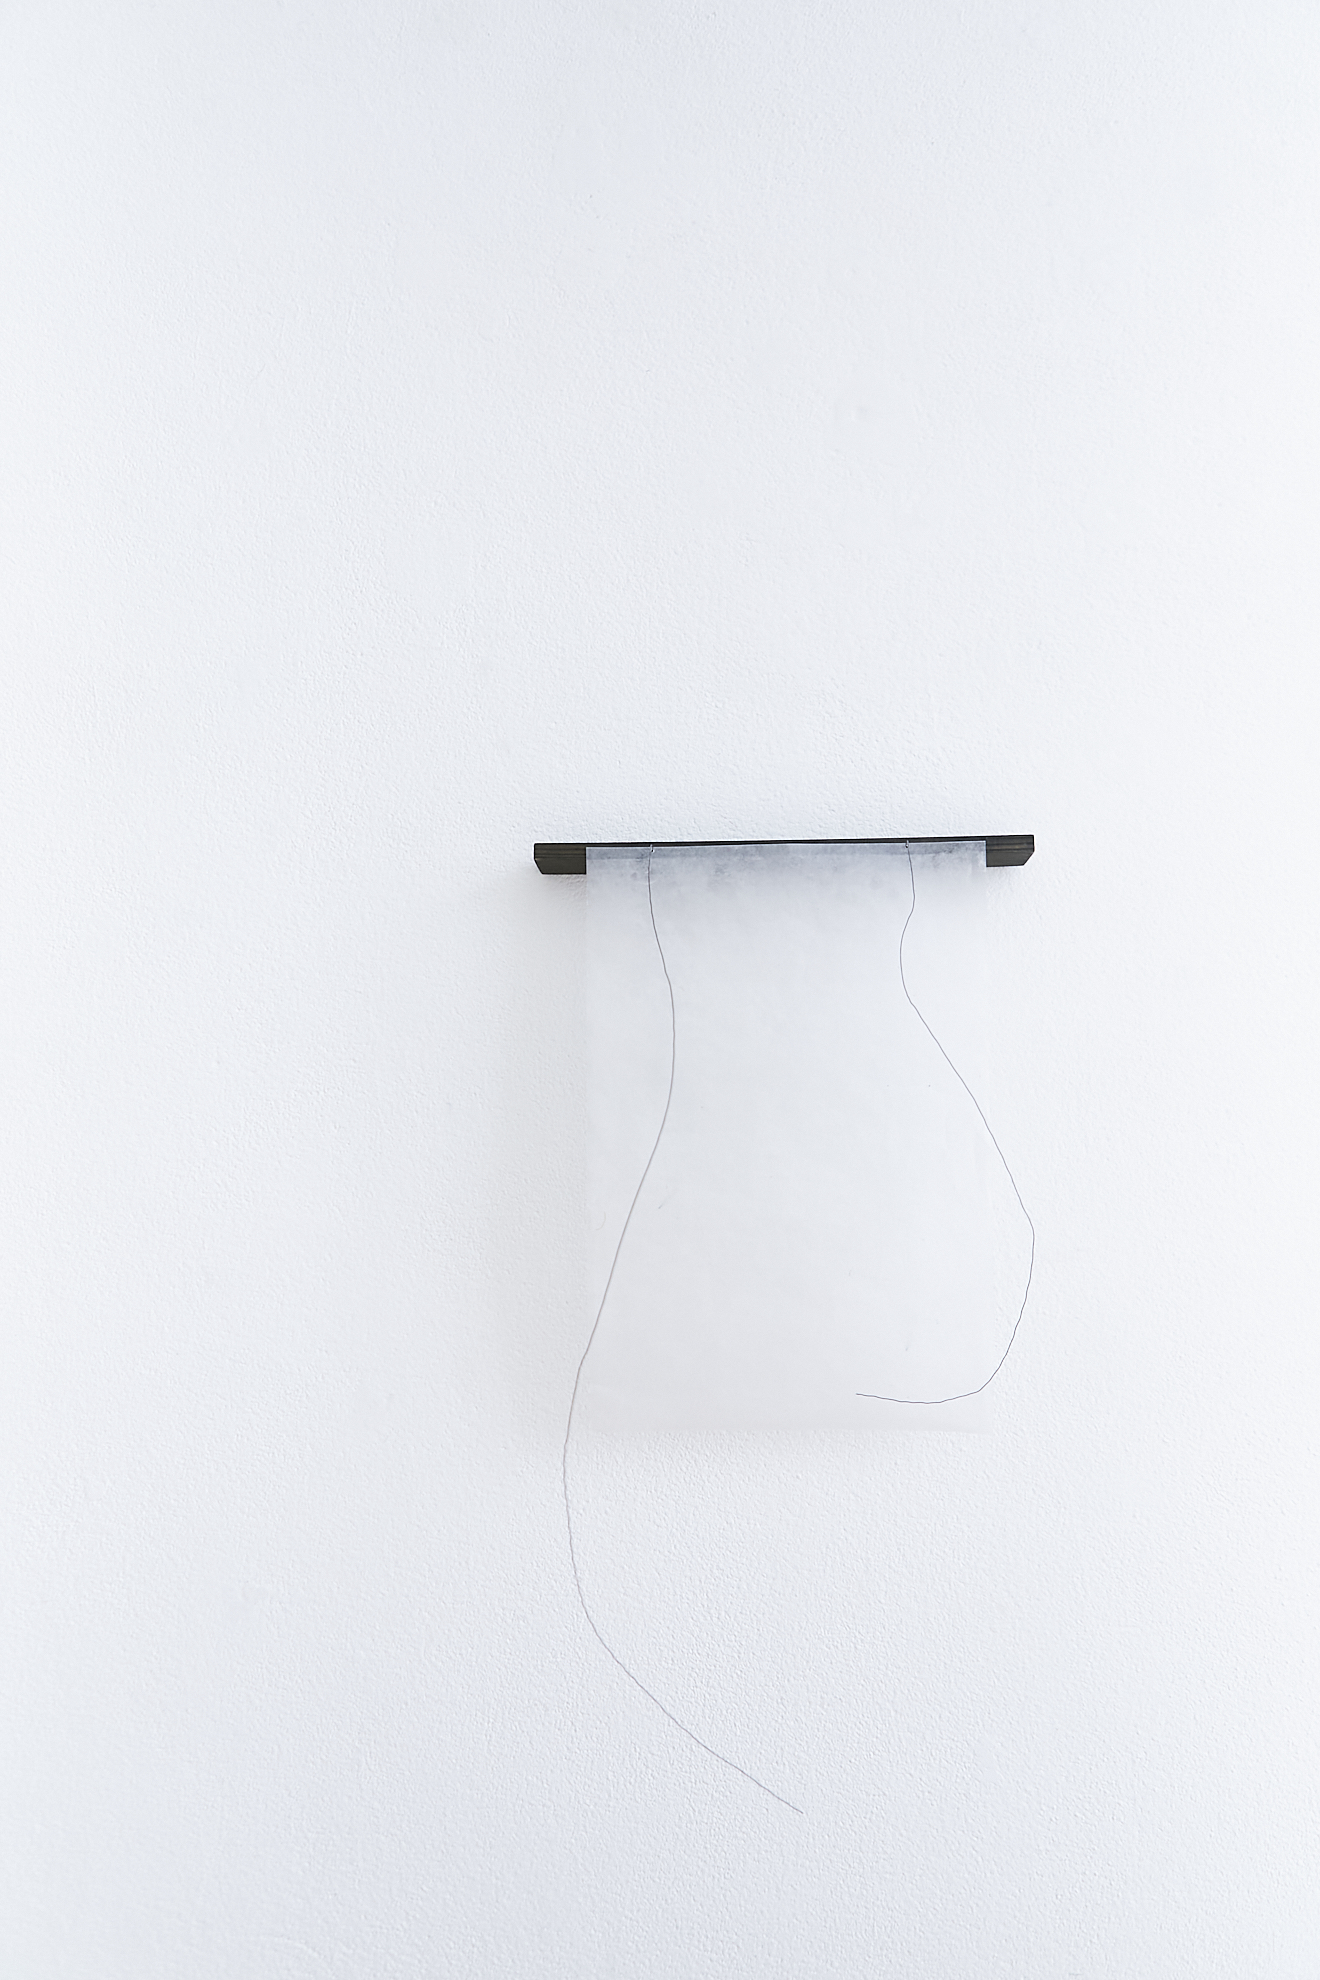 a black piece off wood with a transparent handmade paper over it is hanging off a white wall with two black wire lines hanging from the black wood